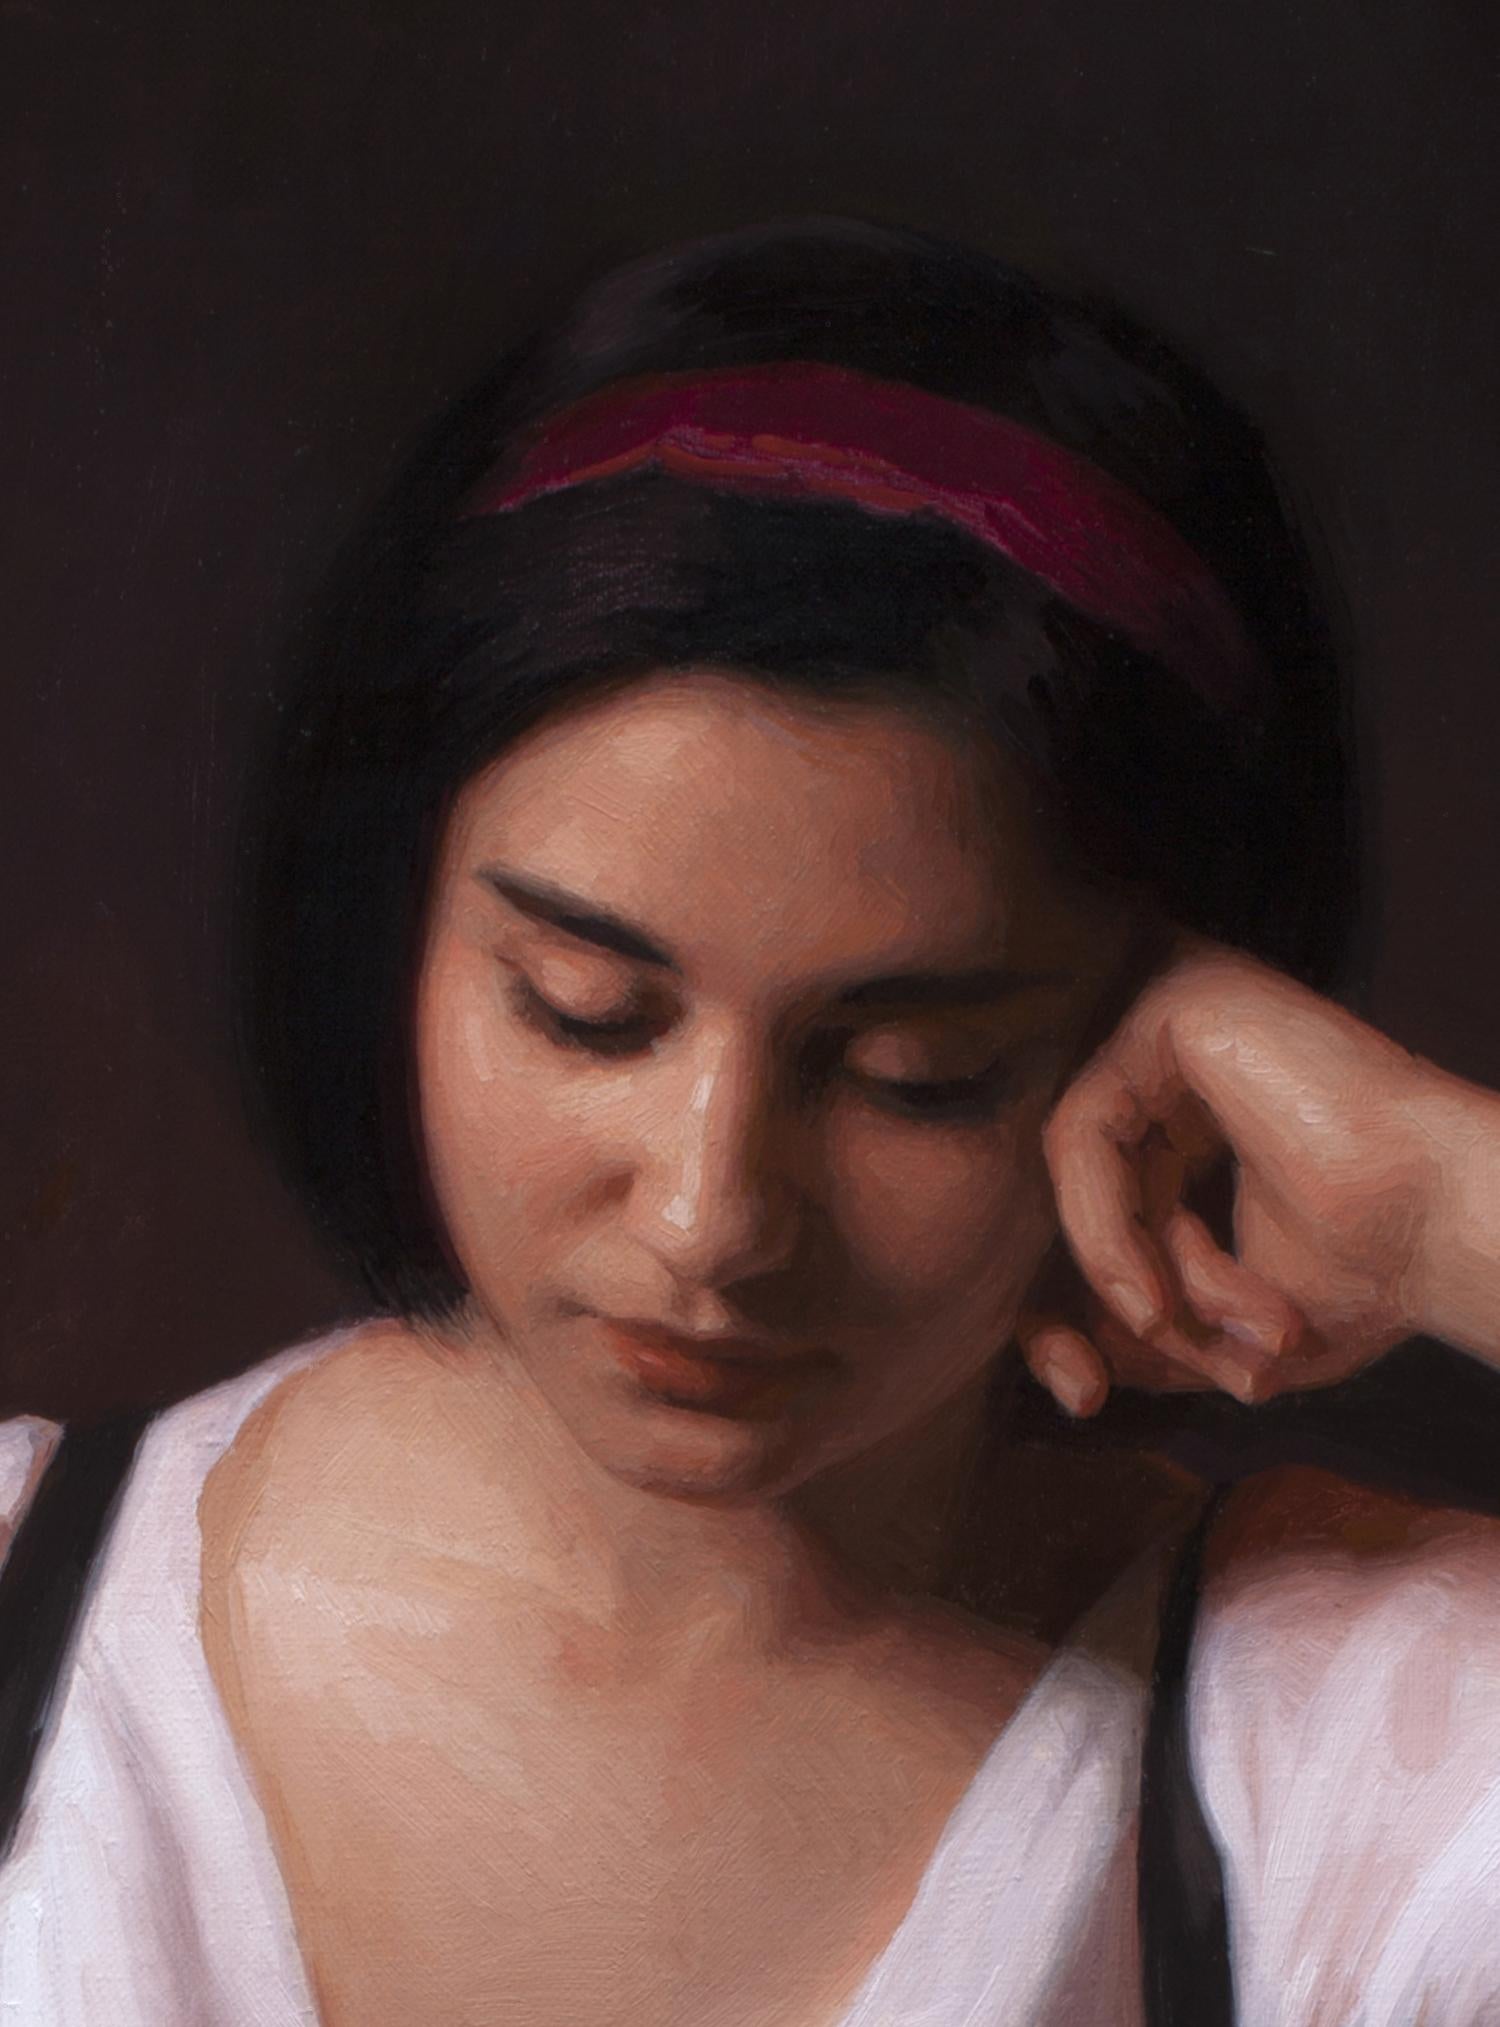 Becoming - Realist Painting by Adrian Gottlieb